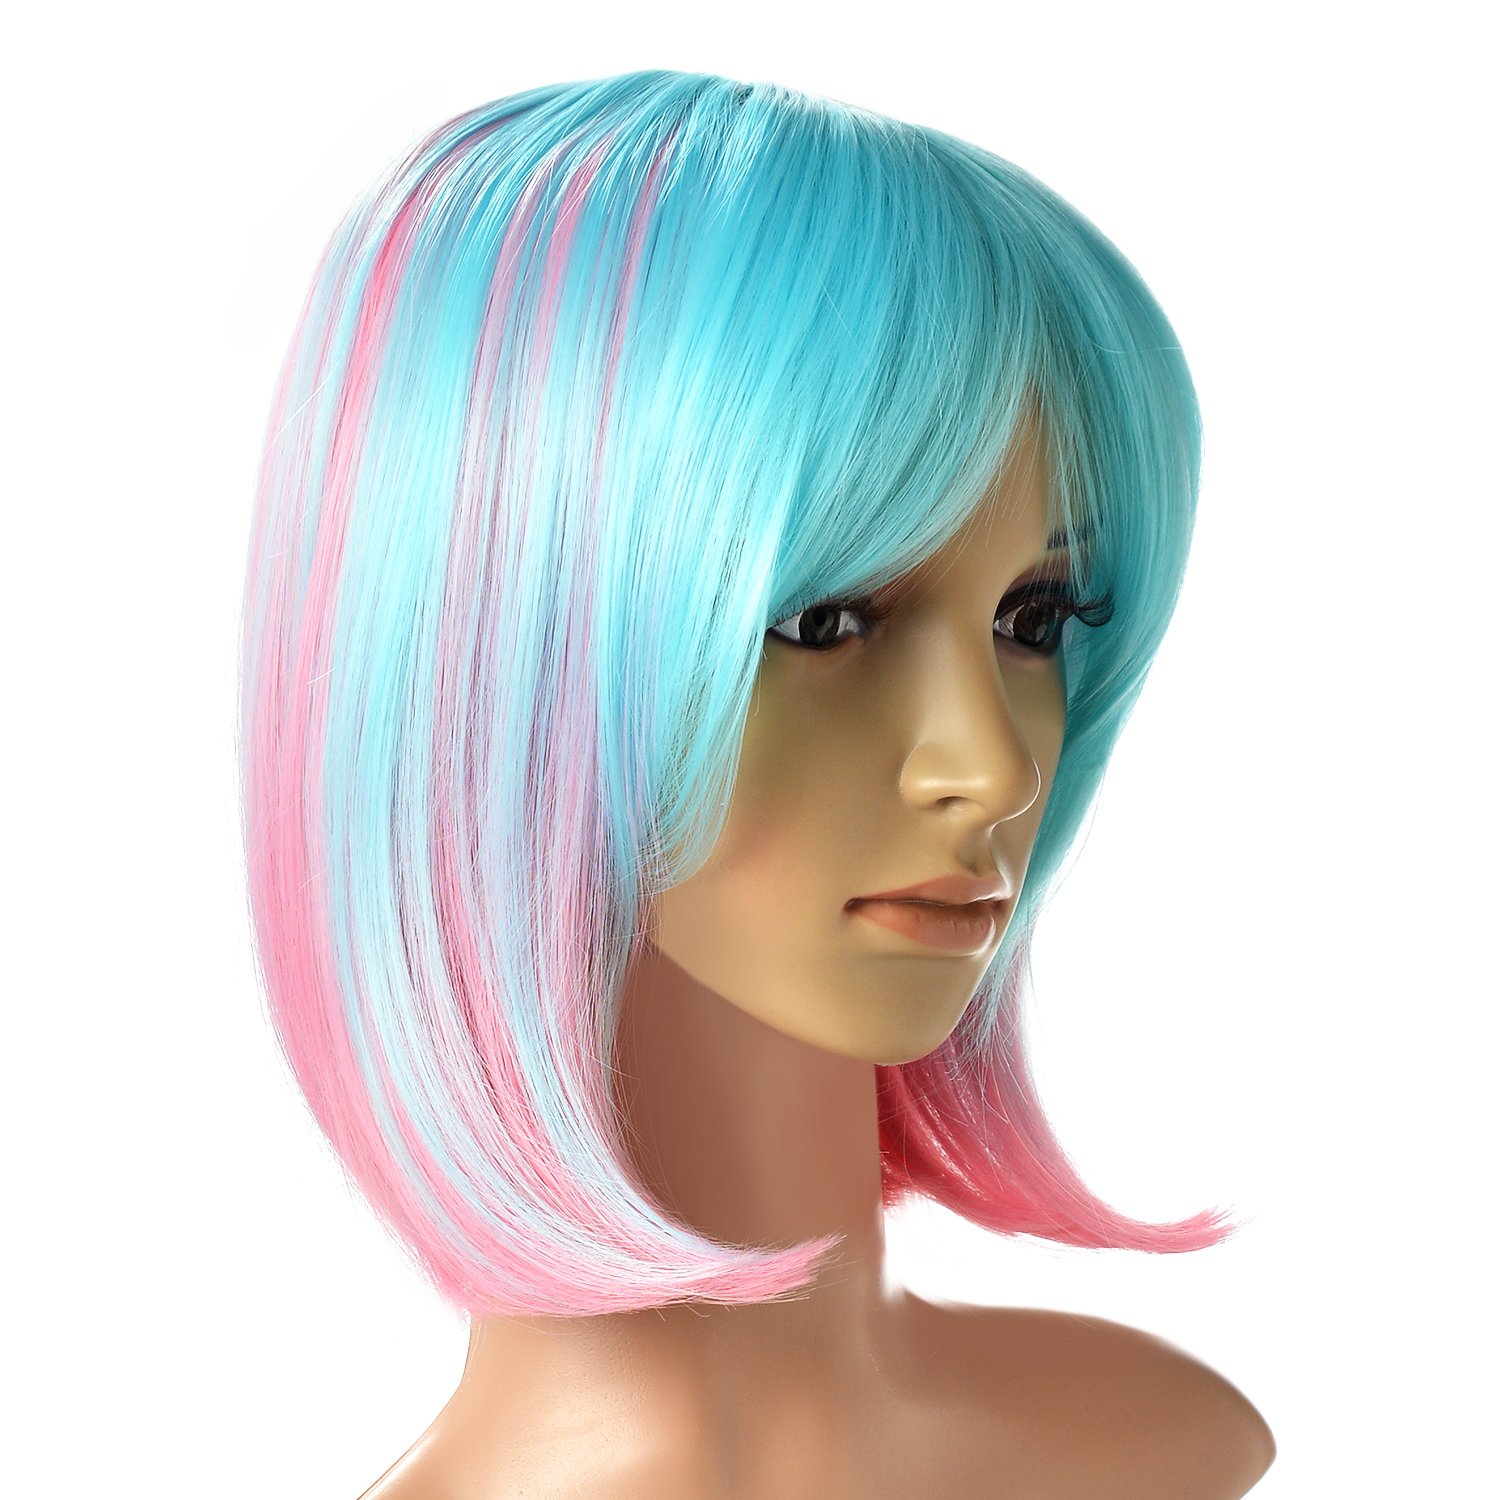 Price:$8.99    Multi-Color Ombre Short Bob Wig, AGPtEK Shoulder Length Hair Extension With Free Stretchable Hairnet  Beauty